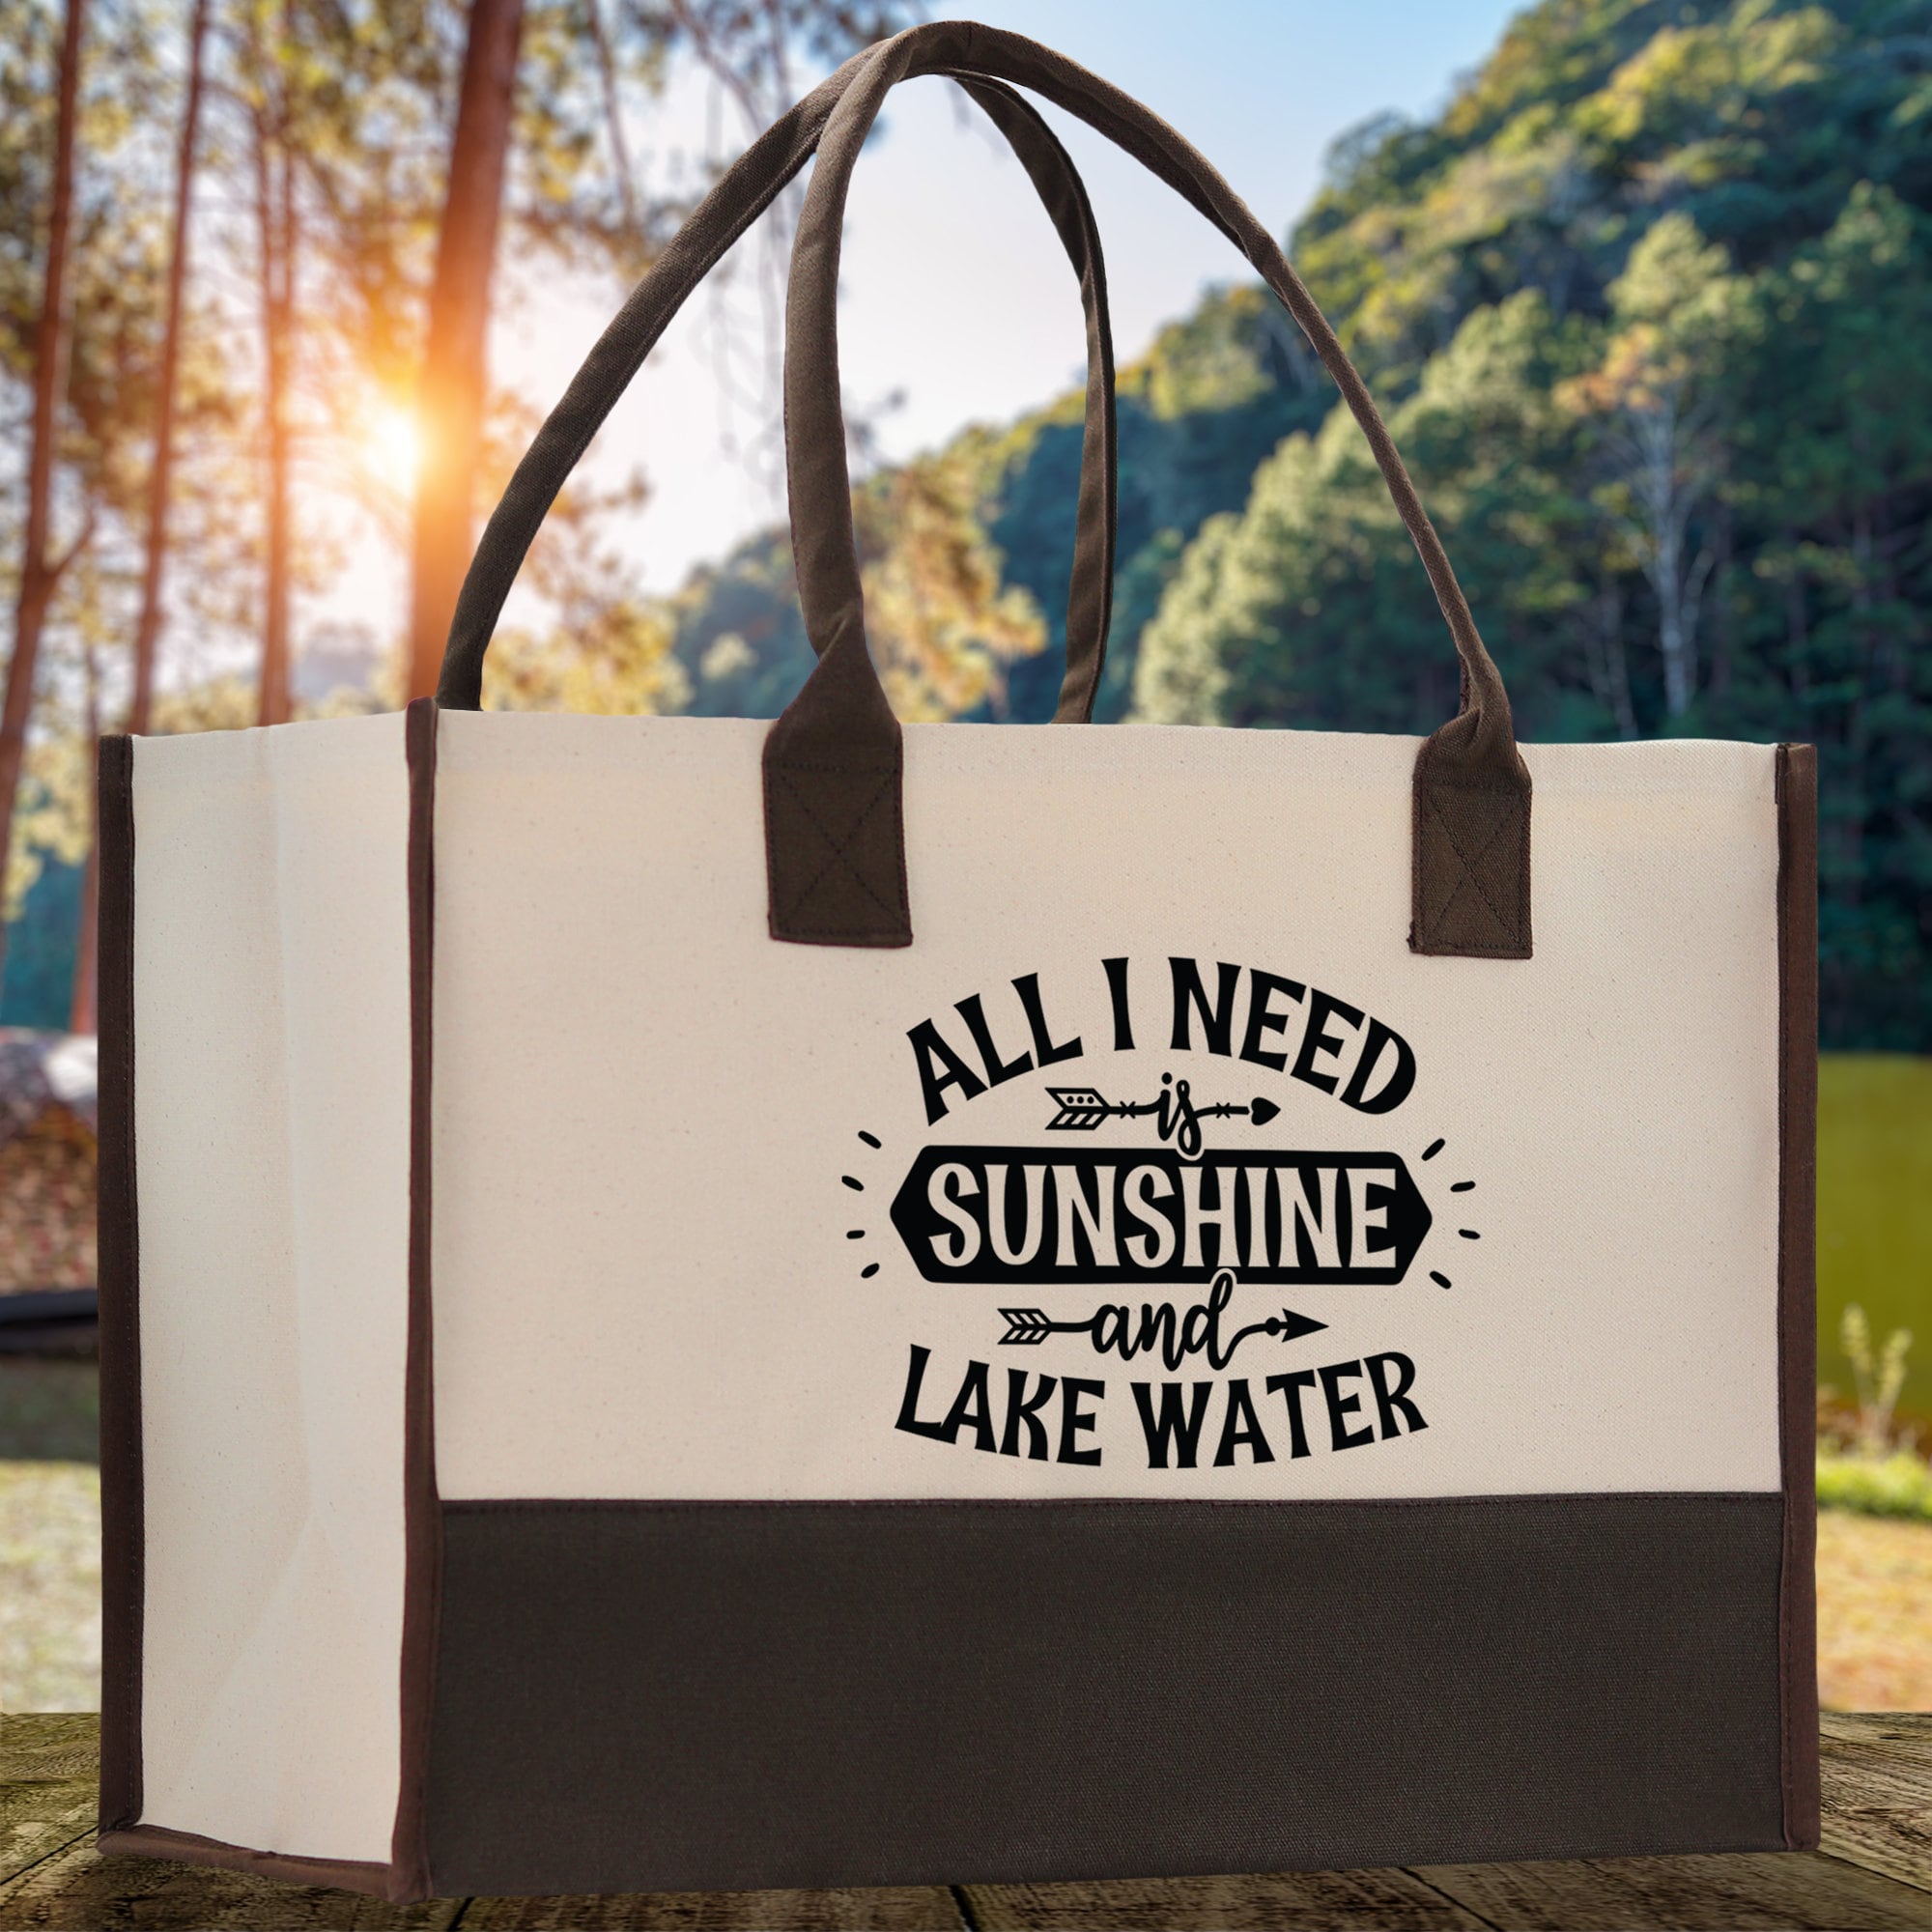 All I Need Sunshine and Lake Water Cotton Canvas Chic Tote Bag Camping Tote Lake Lover Gift Tote Bag Outdoor Tote Weekender Tote Laker Tote